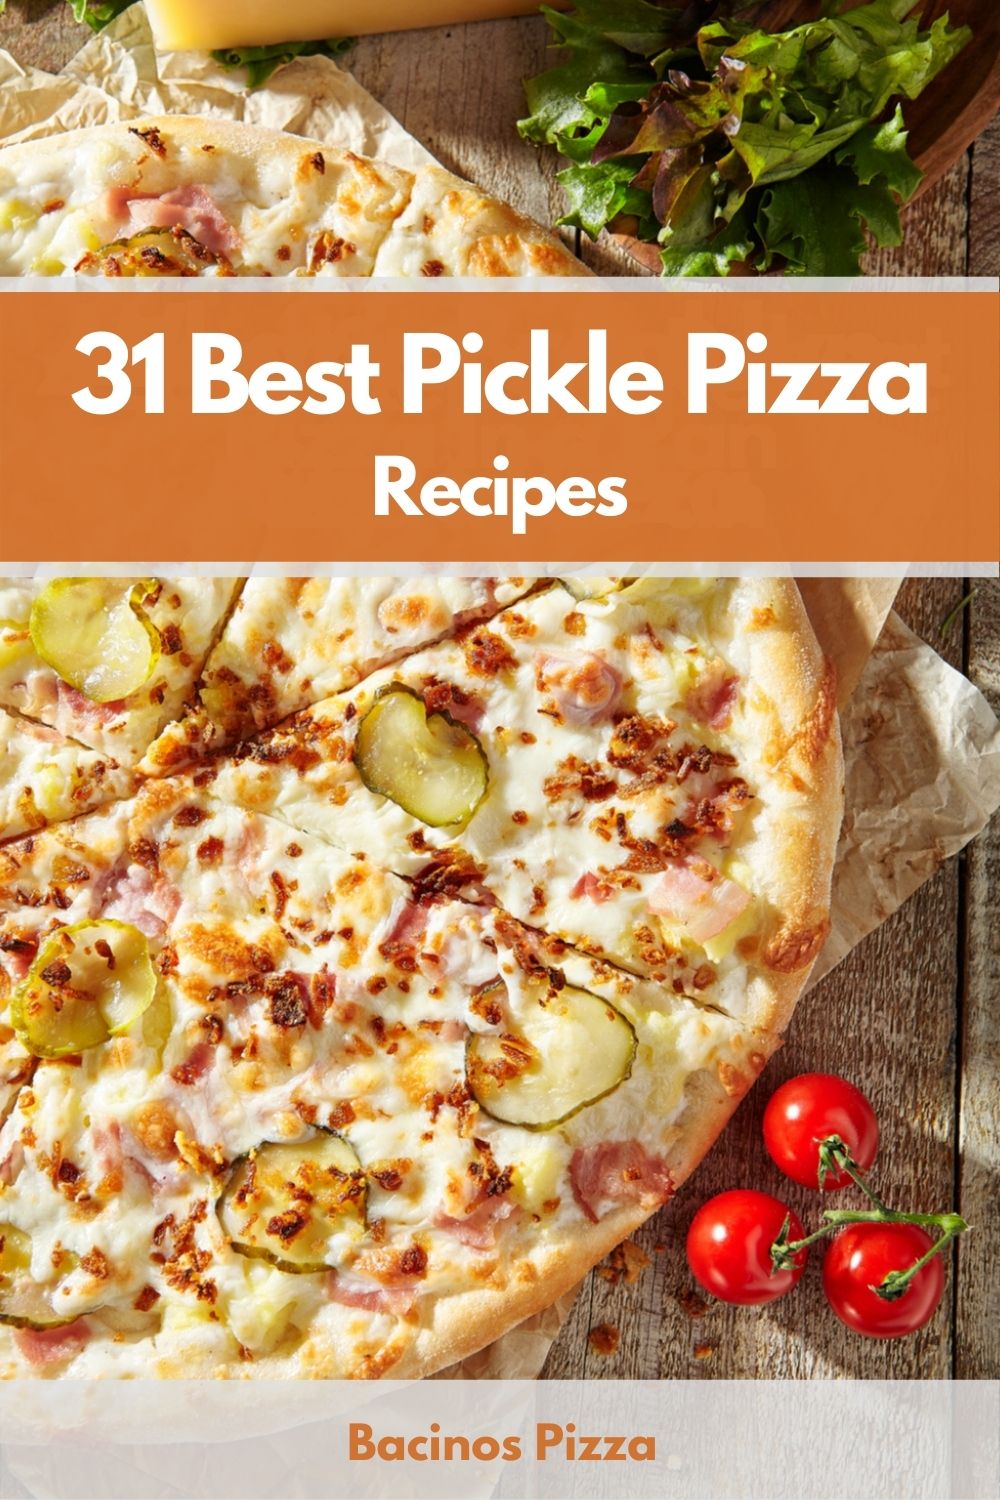 31 Best Pickle Pizza Recipes pin